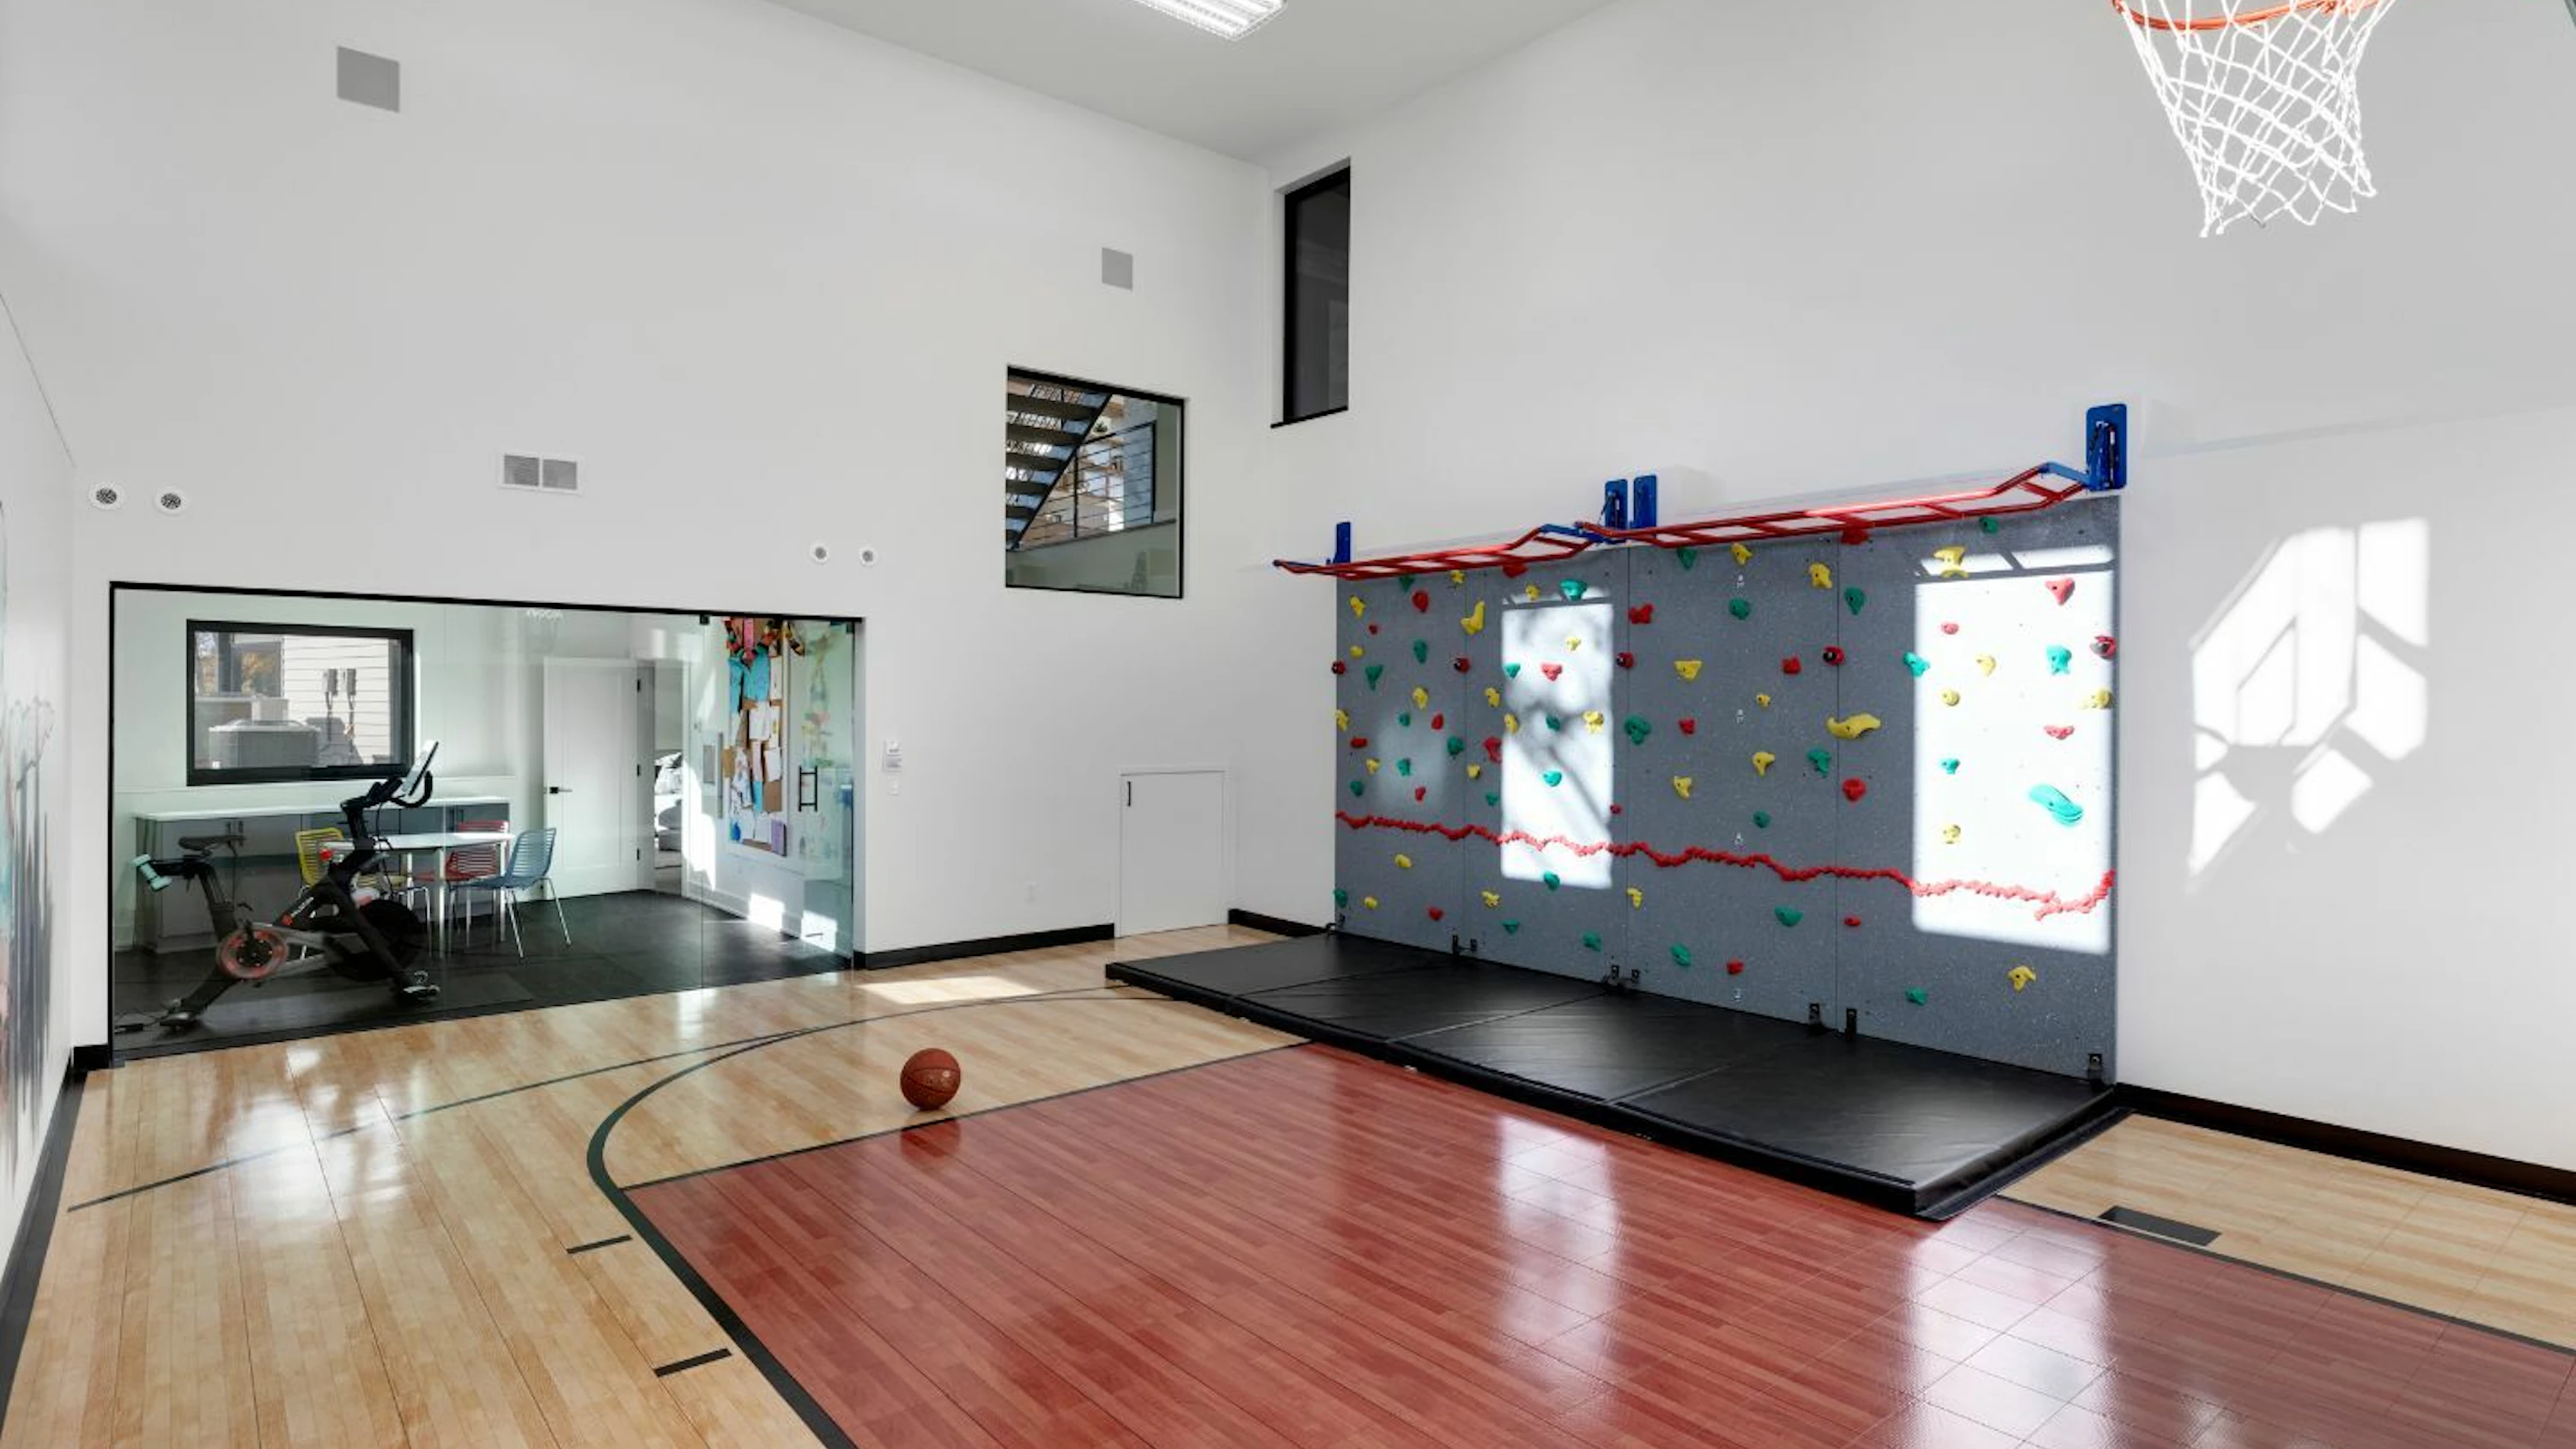 A separate exercise room looks into a sizable athletic court